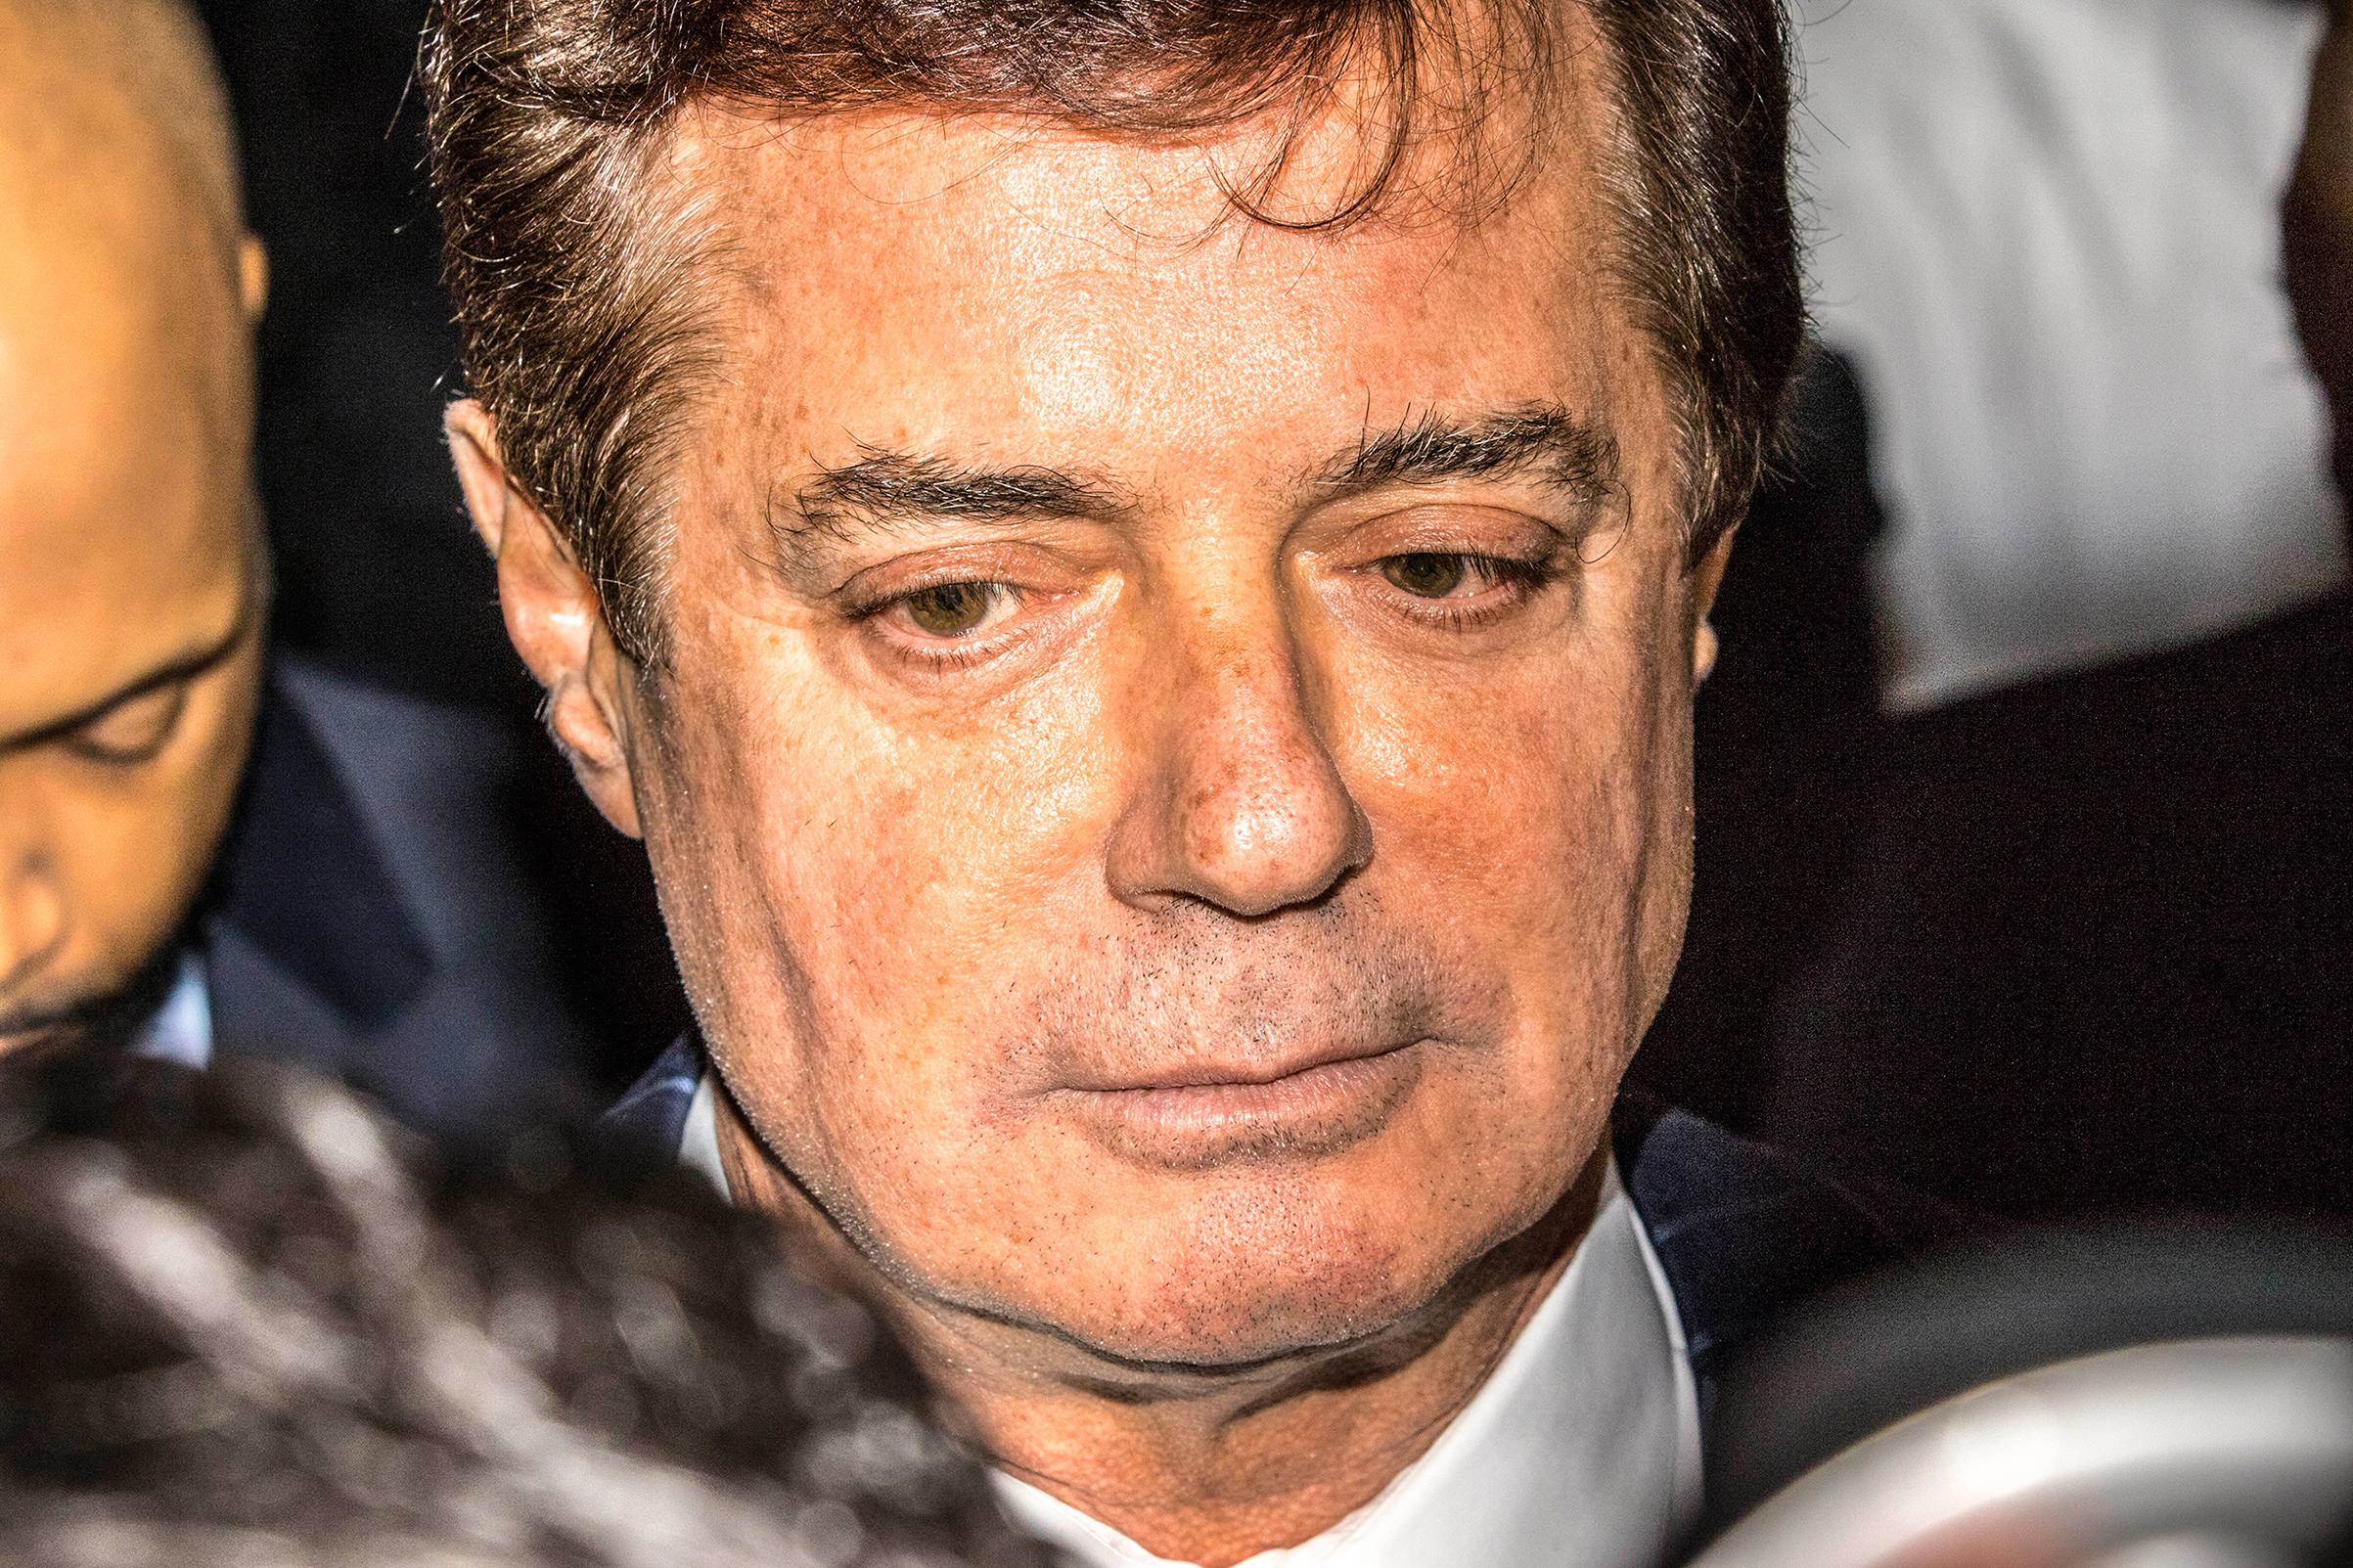 Manafort, the President’s former campaign chairman, was charged with tax fraud and money laundering (Mark Peterson—Redux)